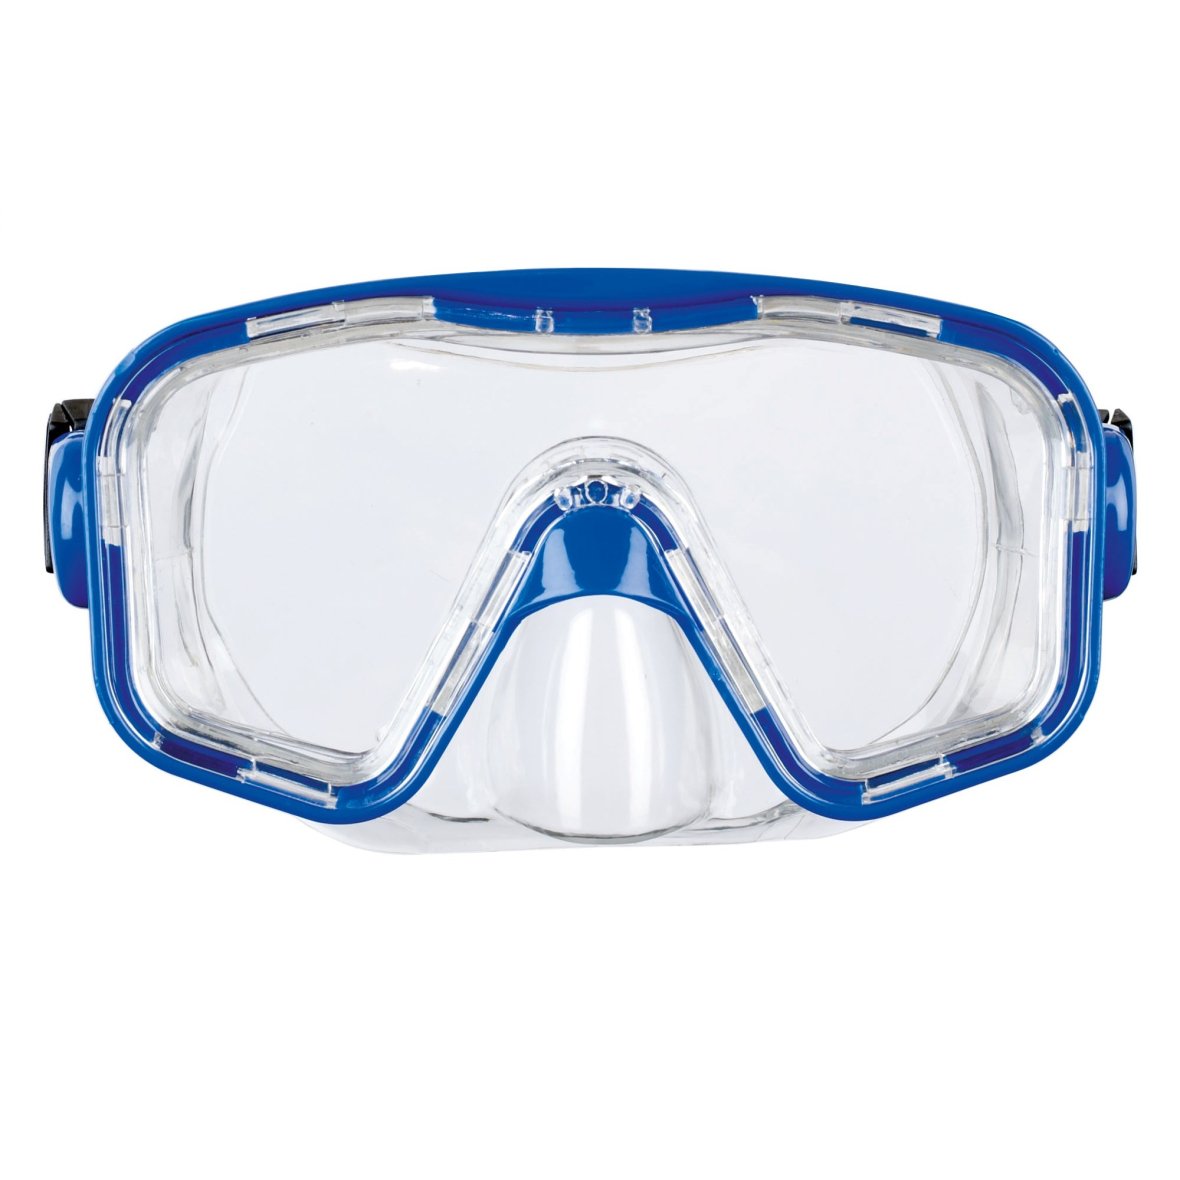 Snorkel and diving mask - ages 12+